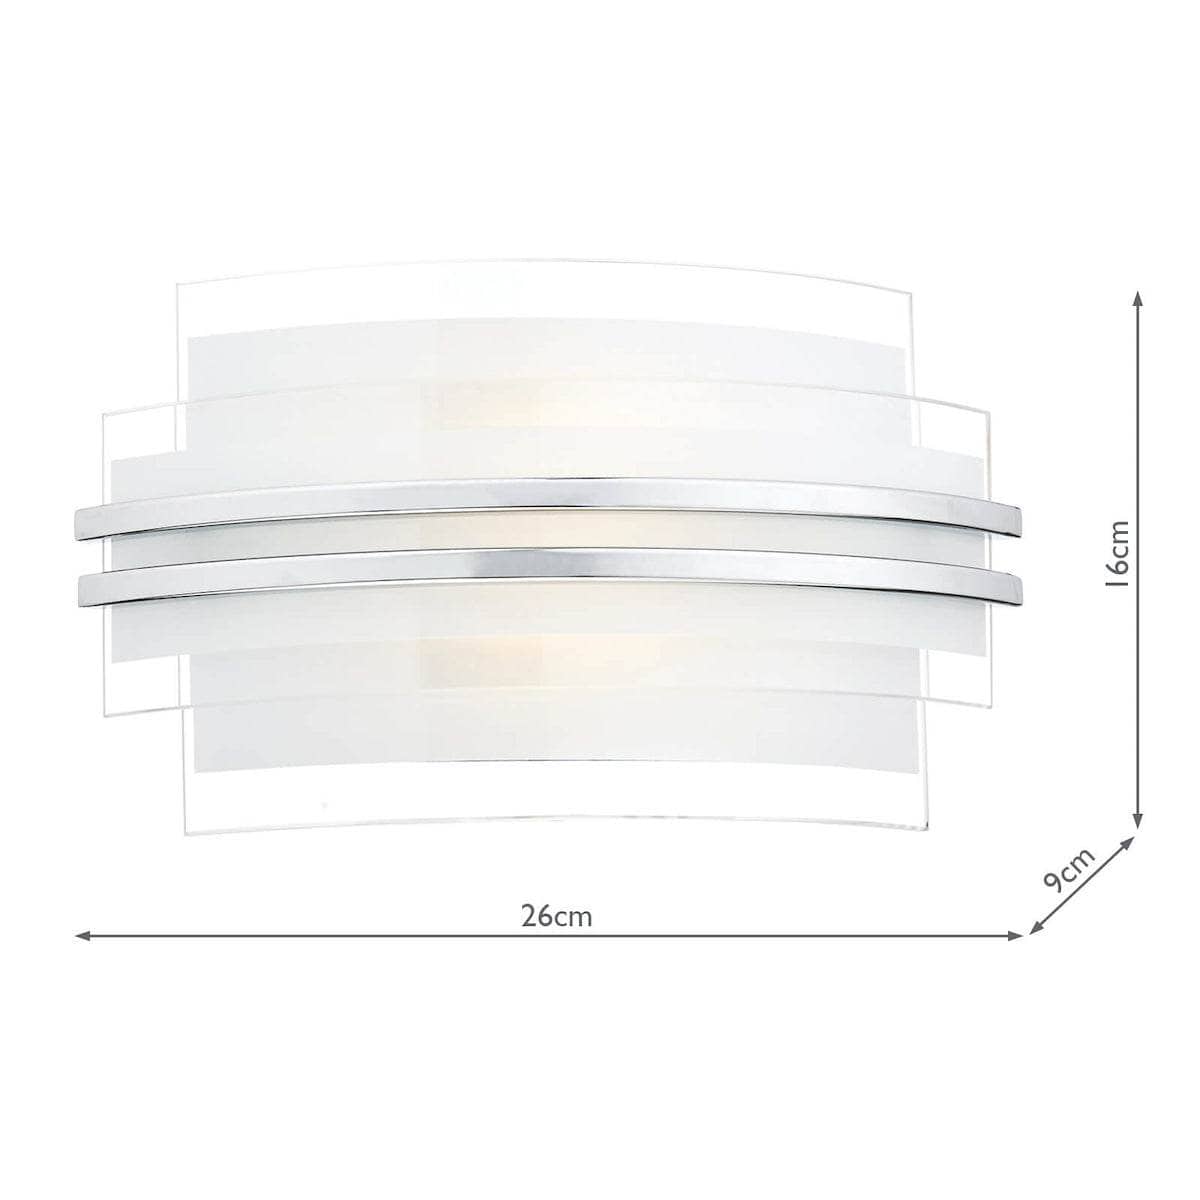 Lights  -  Tas Sec072 Small Sector Double Trim Led Wall Bracket  -  50123710